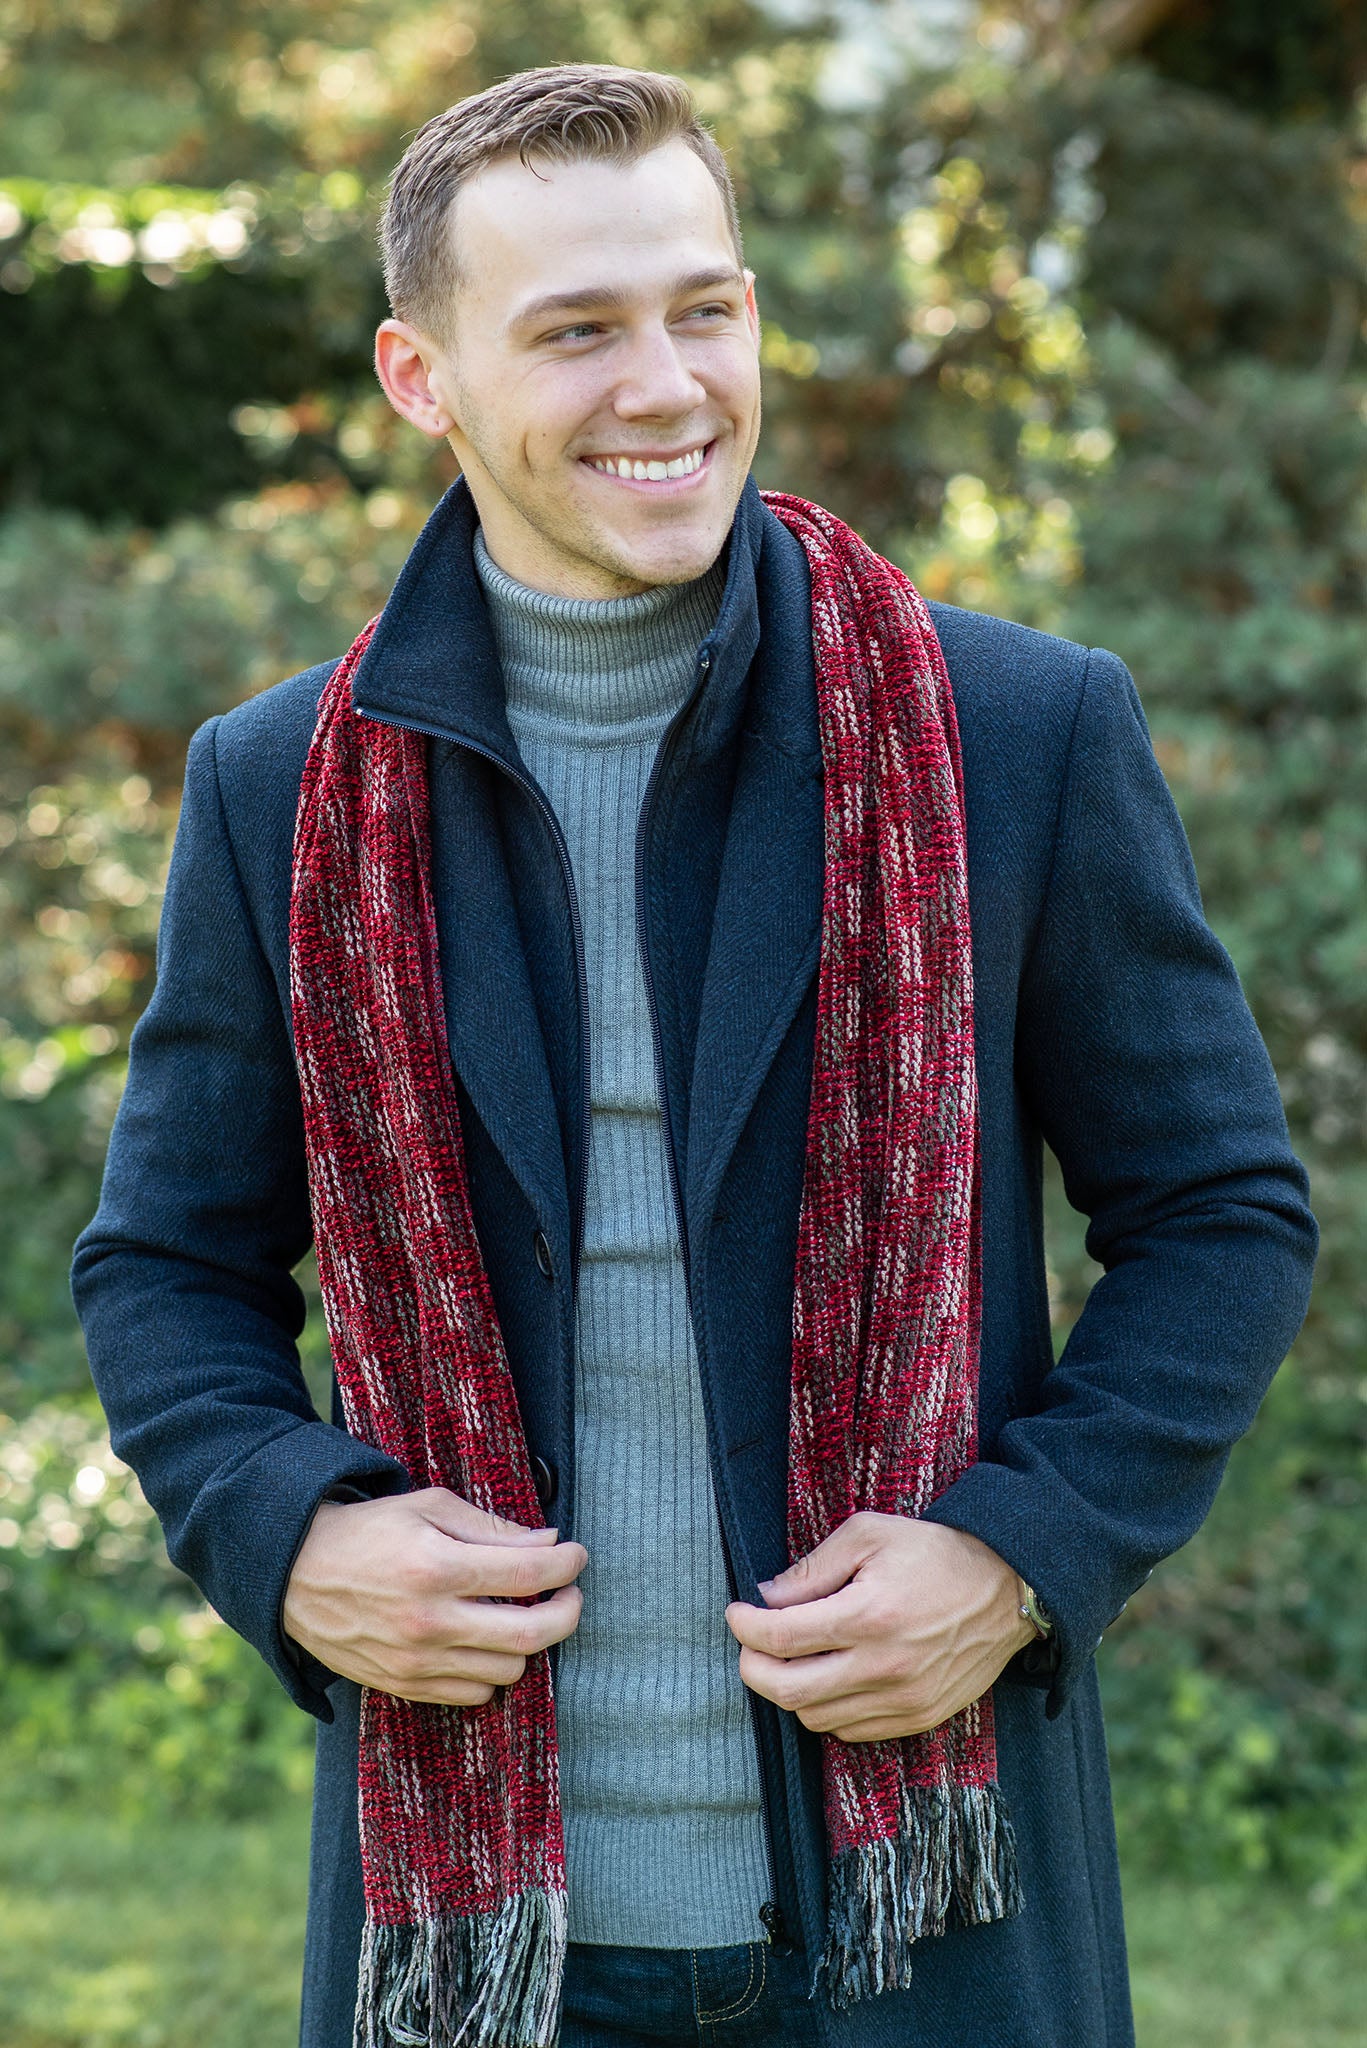 Guy wearing bright red scarf